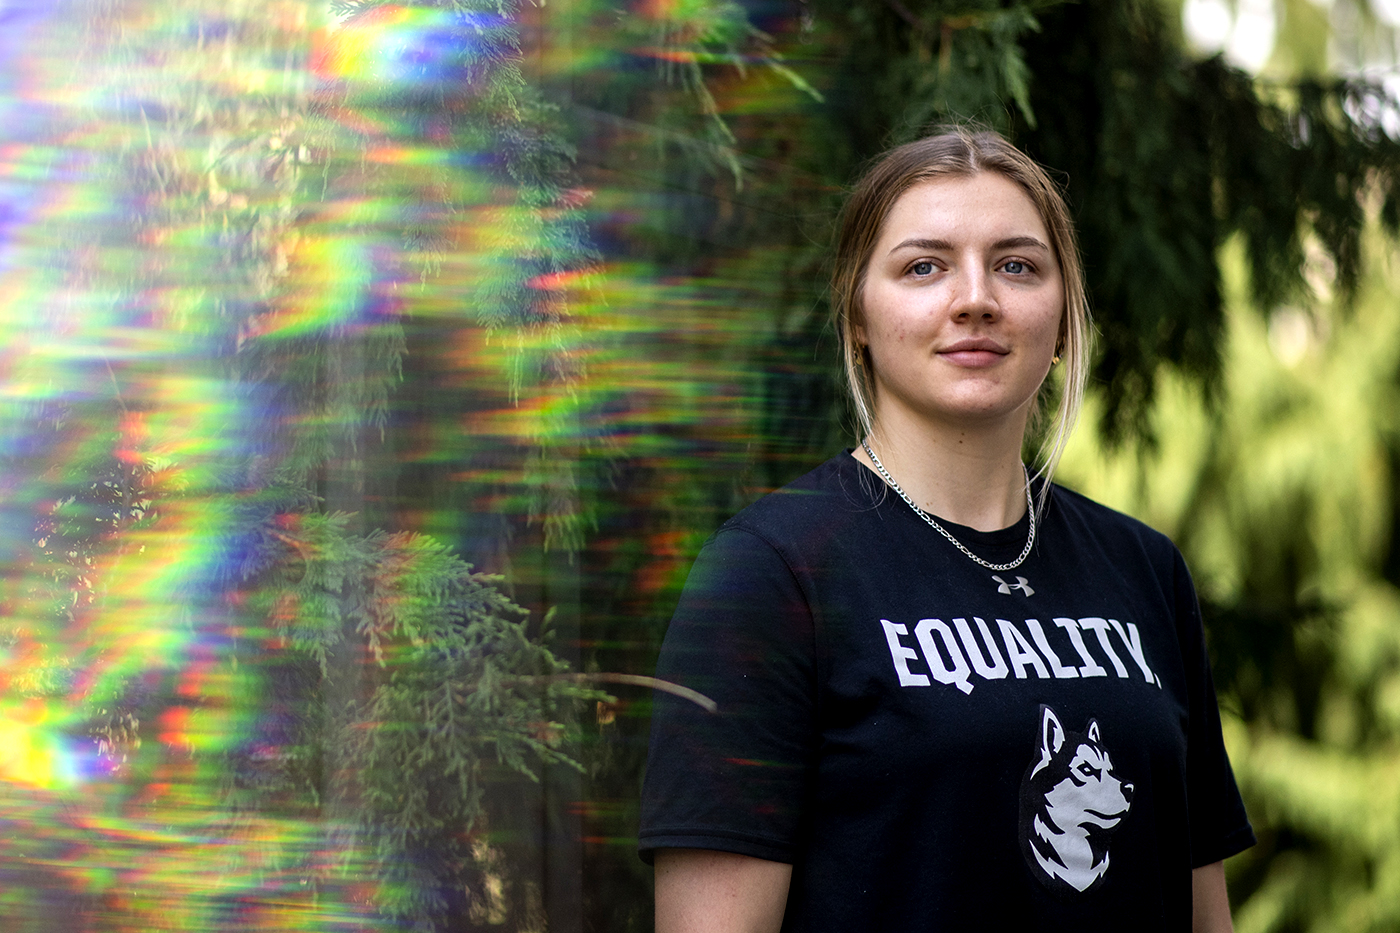 blonde woman wearing black shirt with a husky and the word 'equality' written in all caps on it